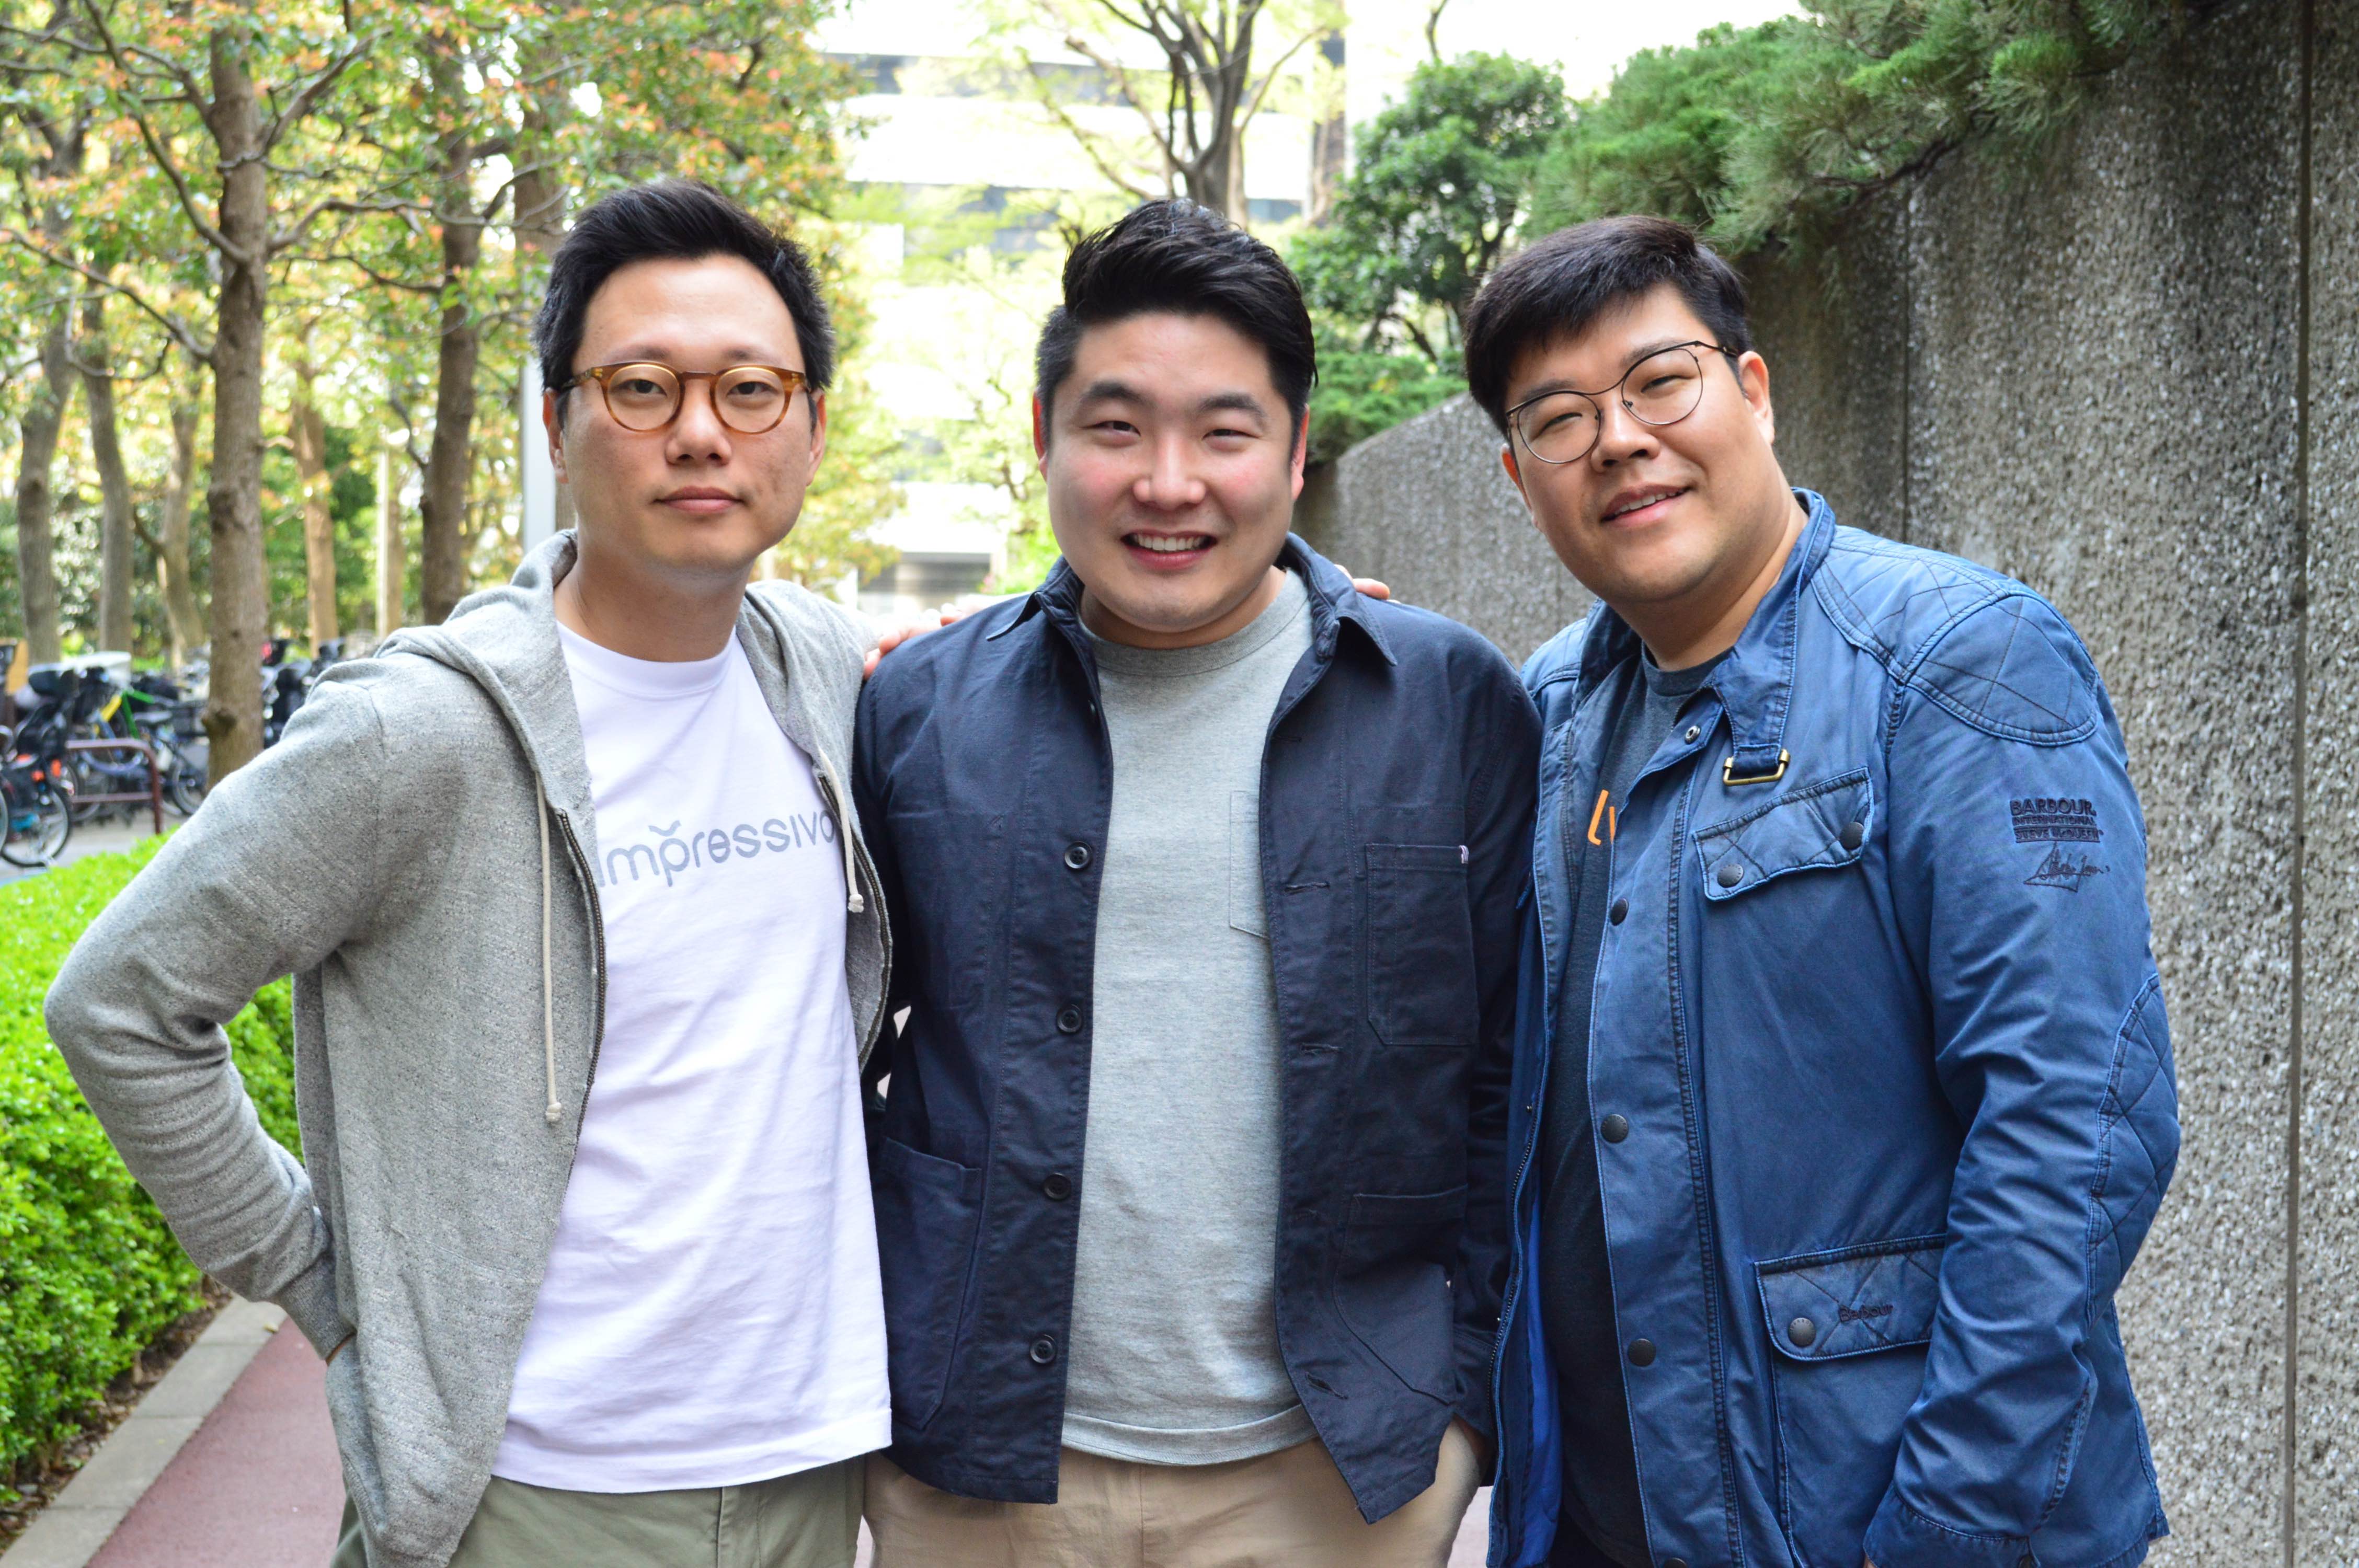 From left: Oh Hyoung Kwon, Sungjae Hwang, and Jung-hee Ryu, from FoundationX and FuturePlay: the trio have created the first fiat and cryptocurrency funds in Korea that are under the same managers.